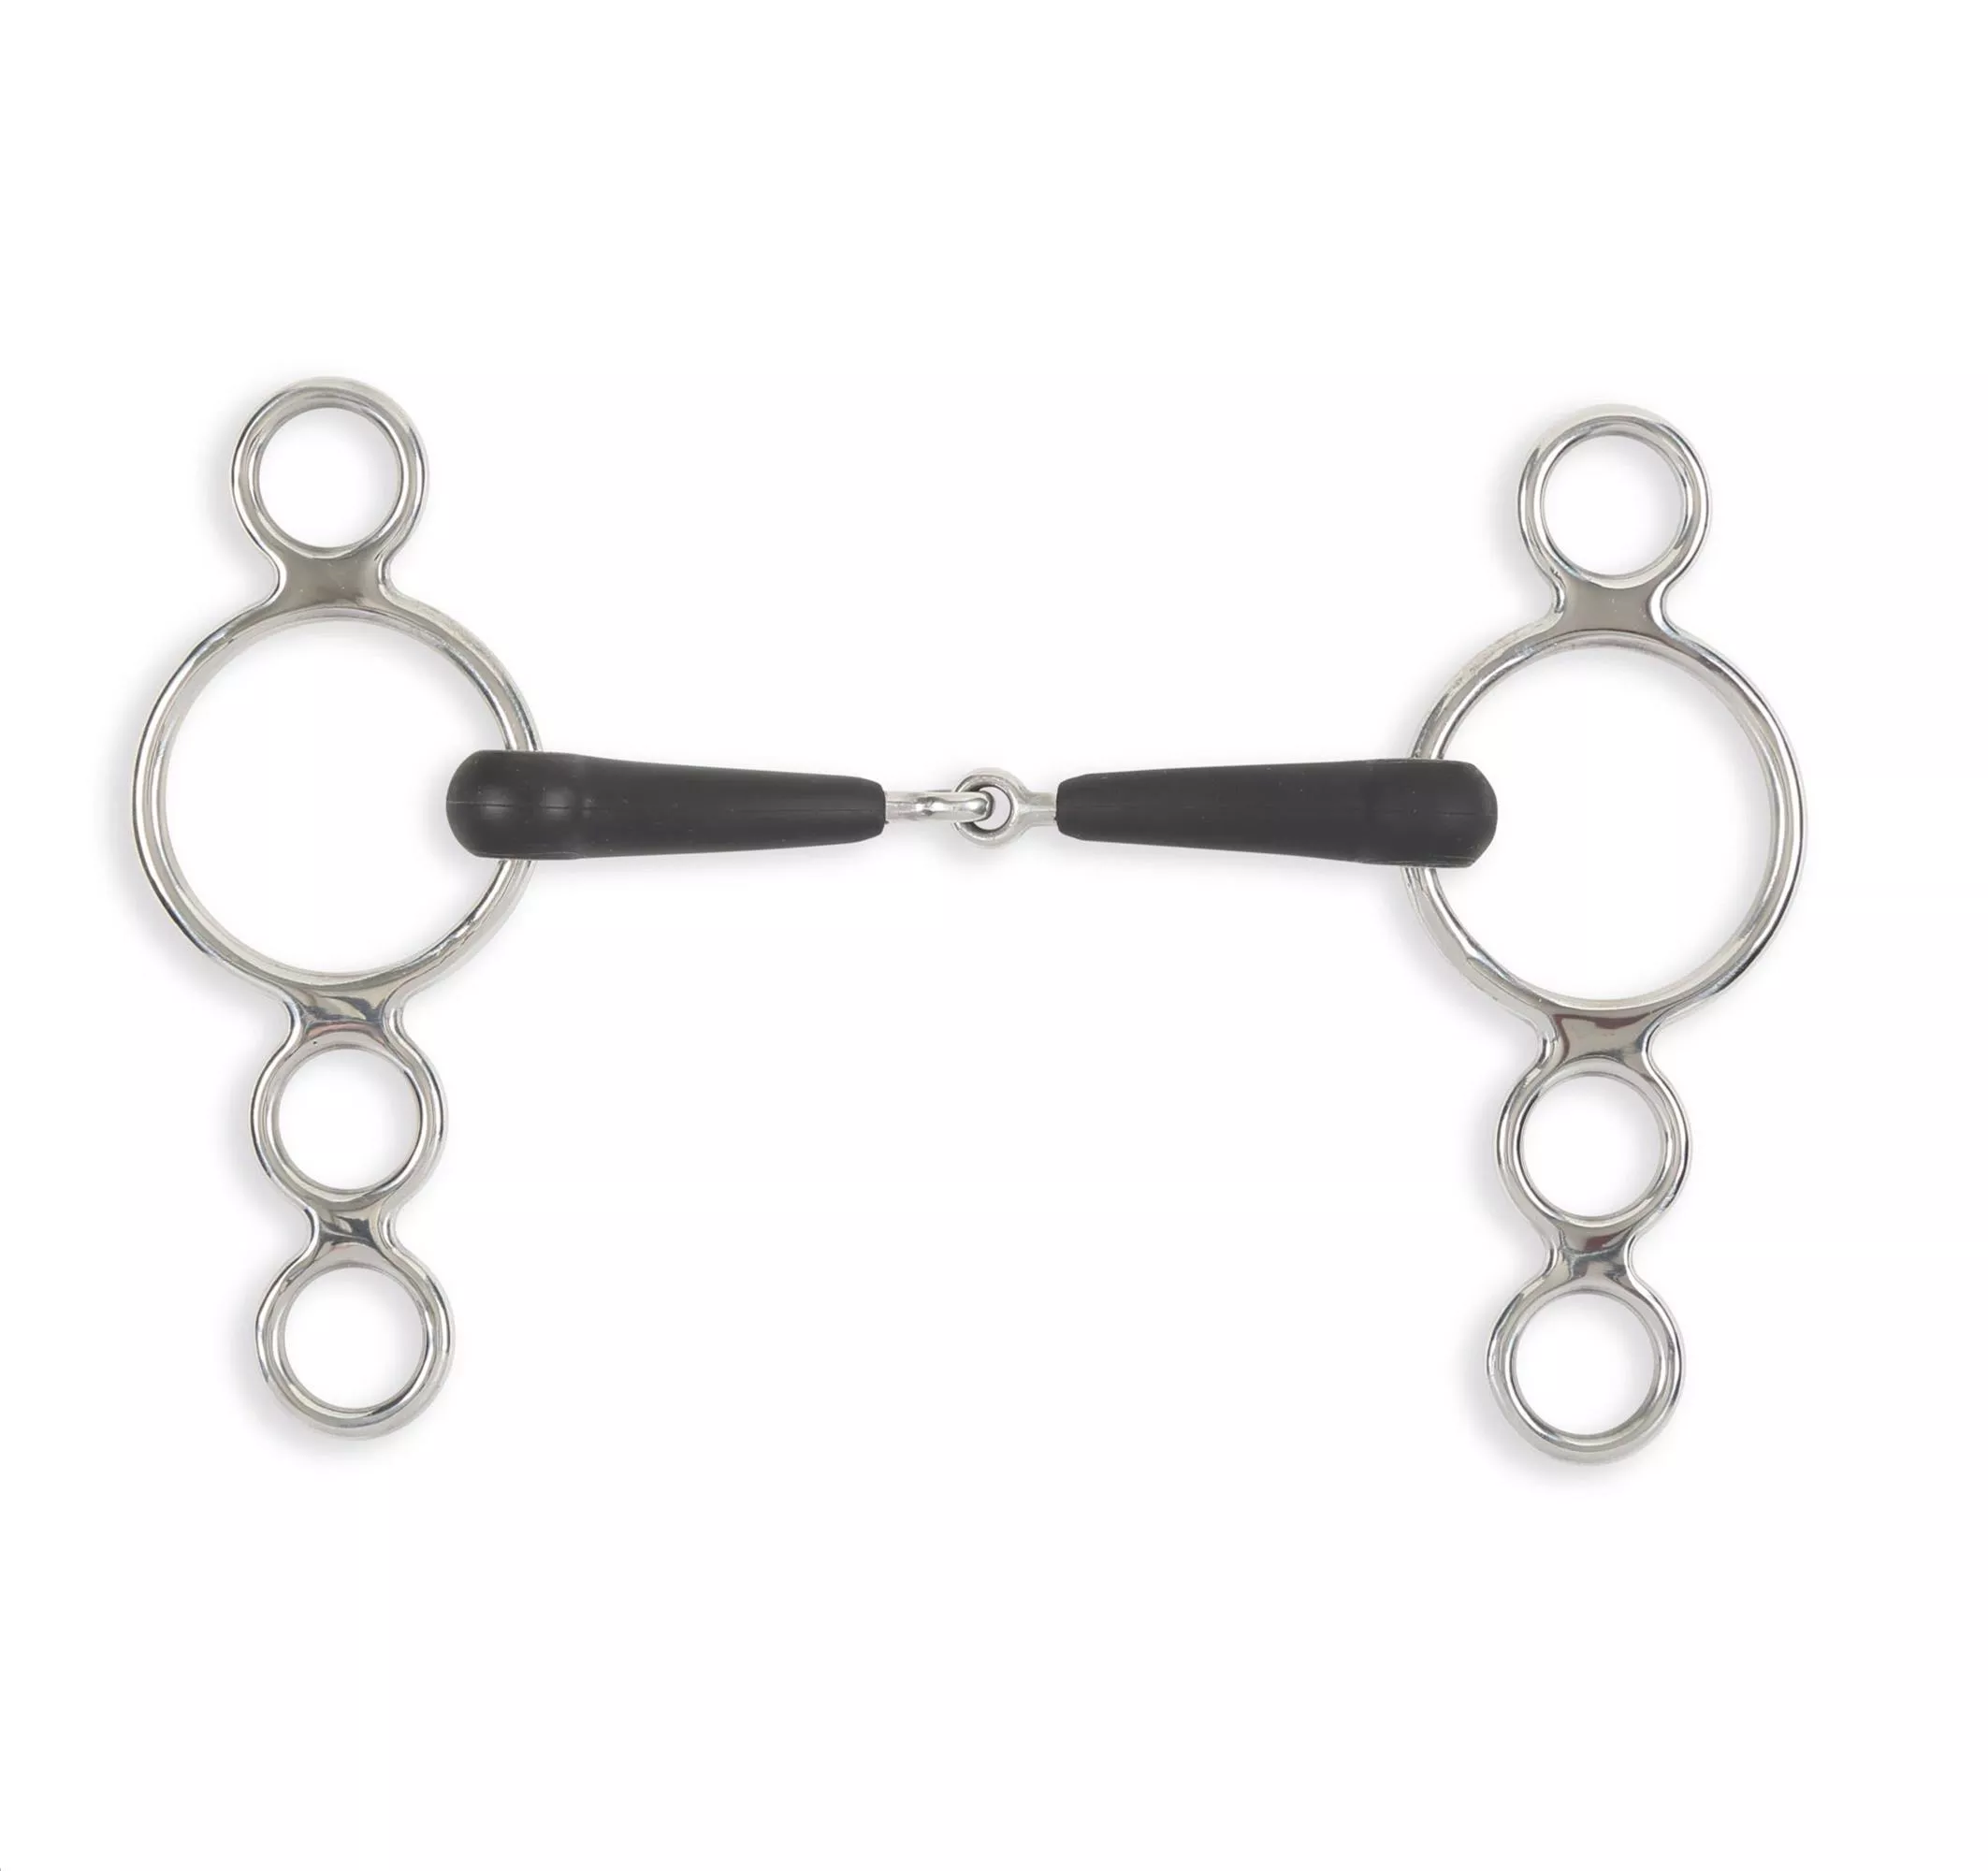 Equikind+ Jointed 3 Ring Dutch Gag 4.5"